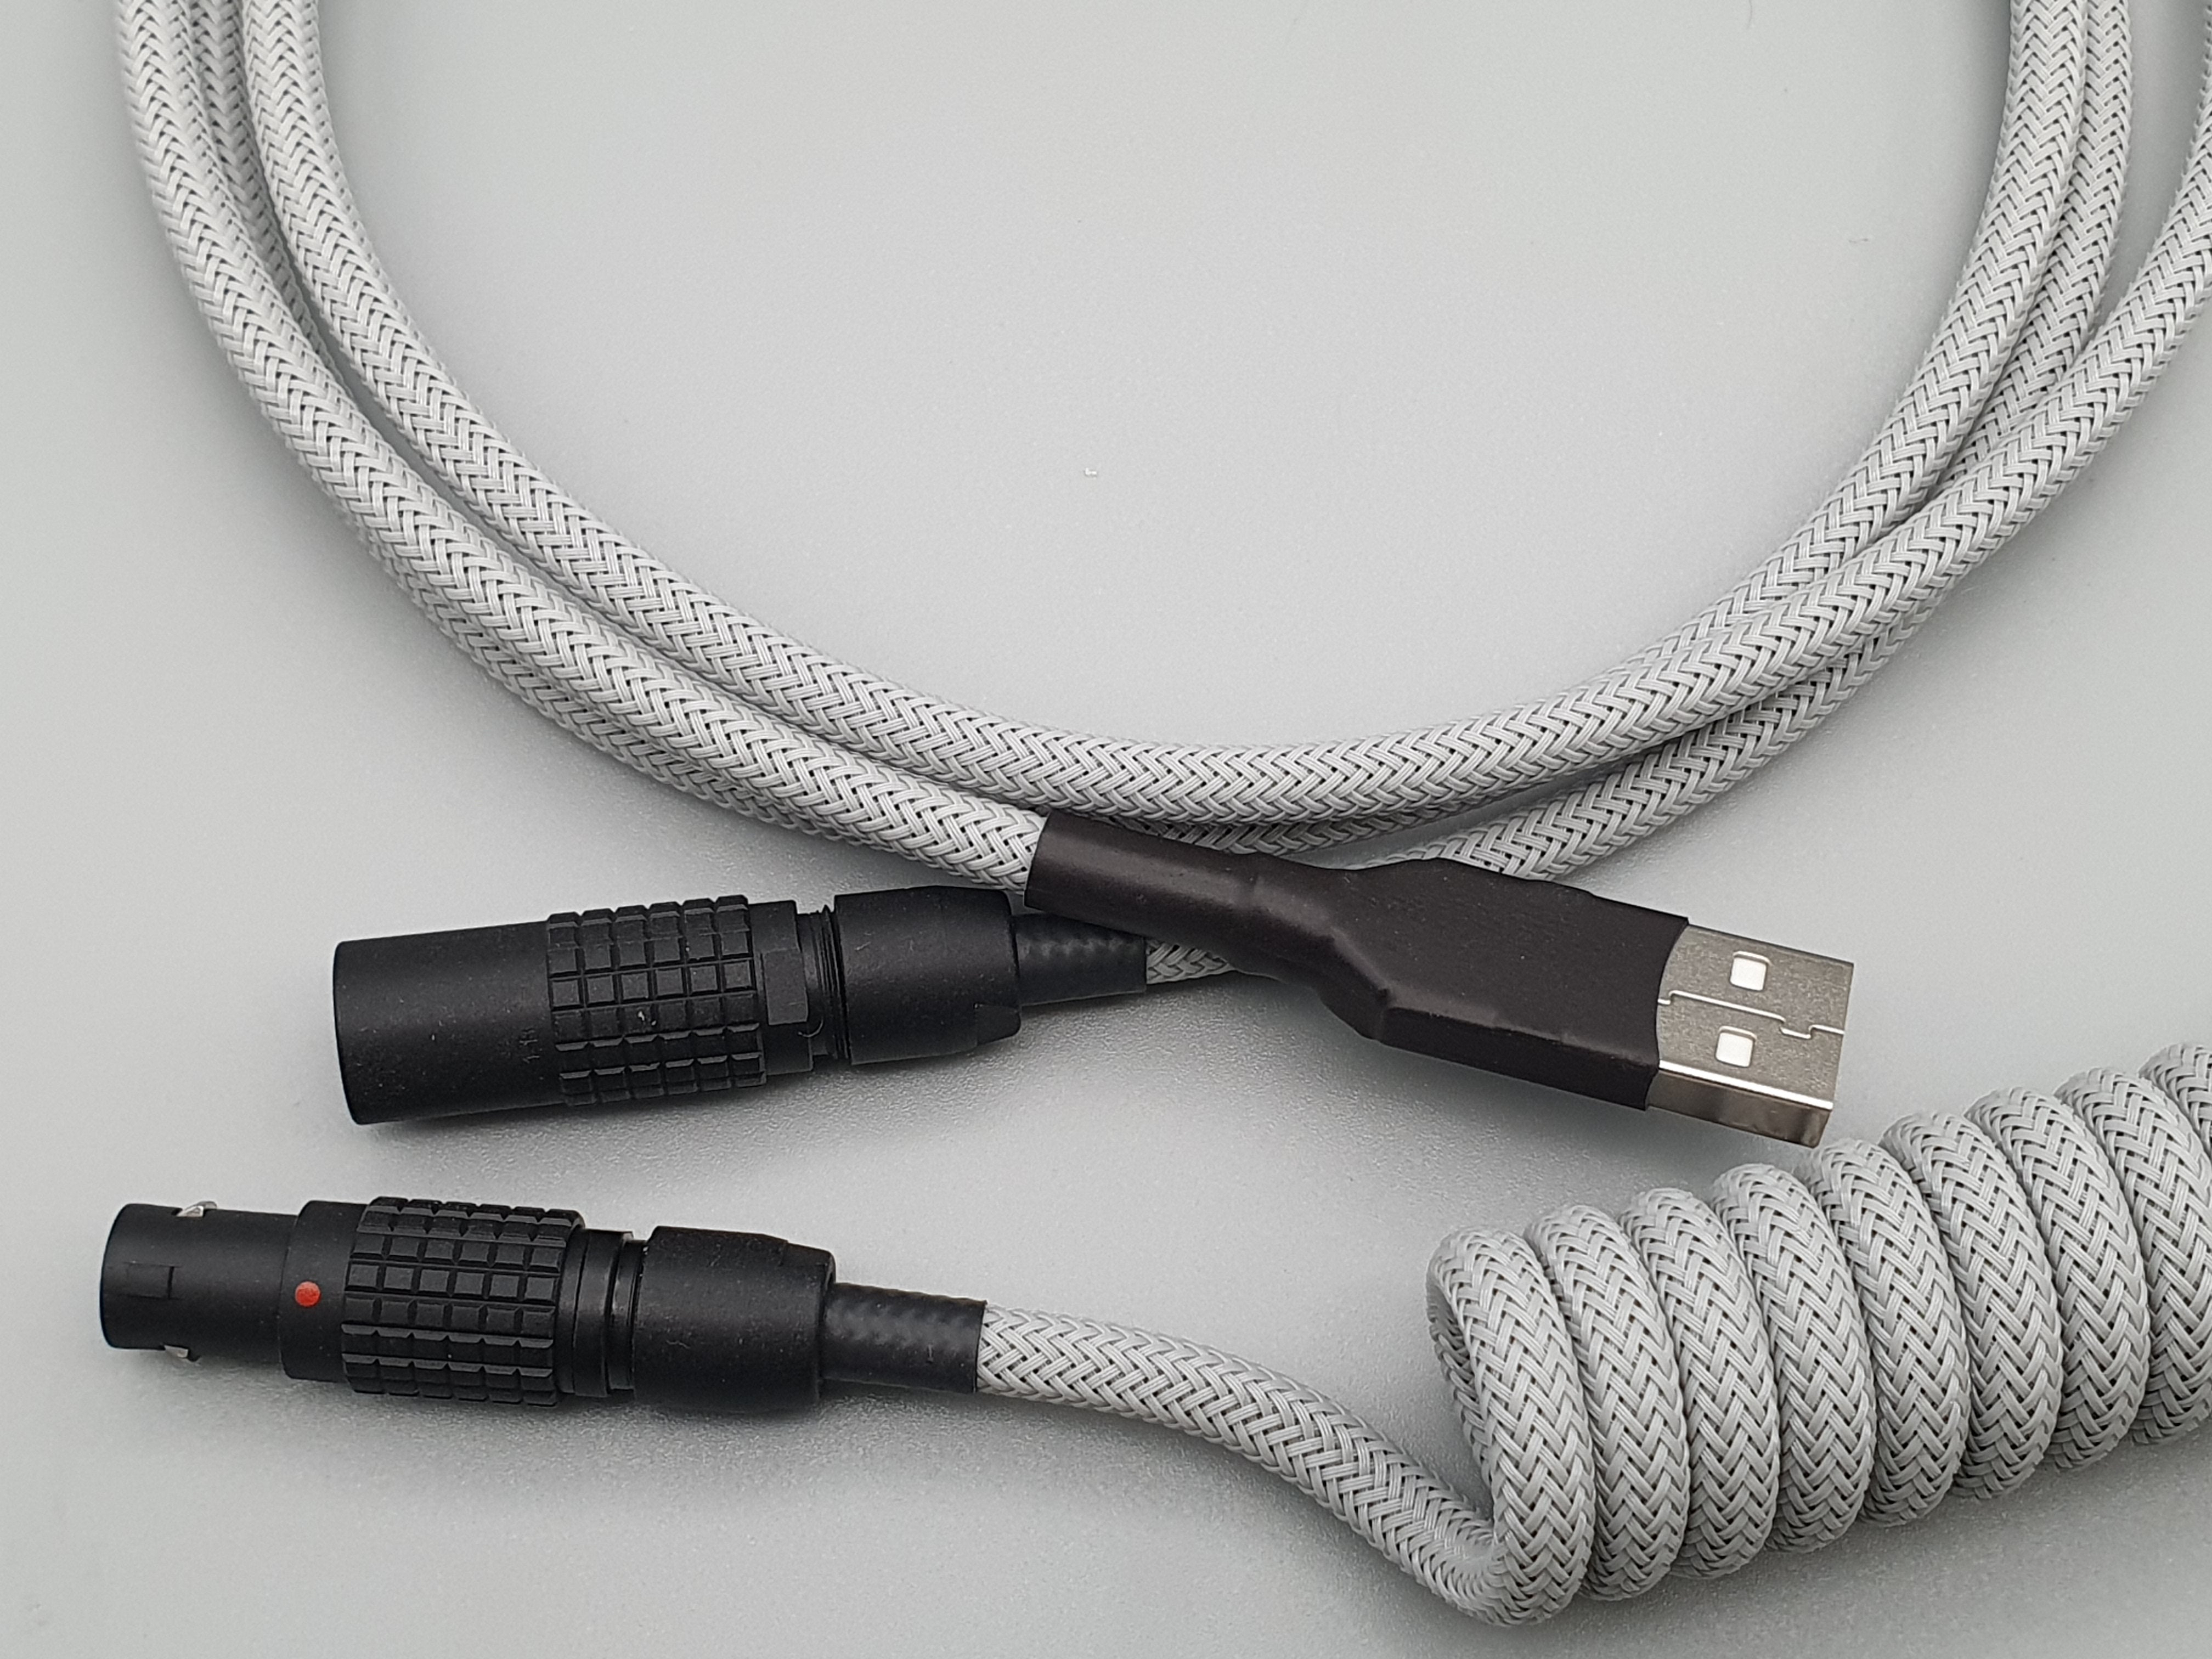 Complete Cables